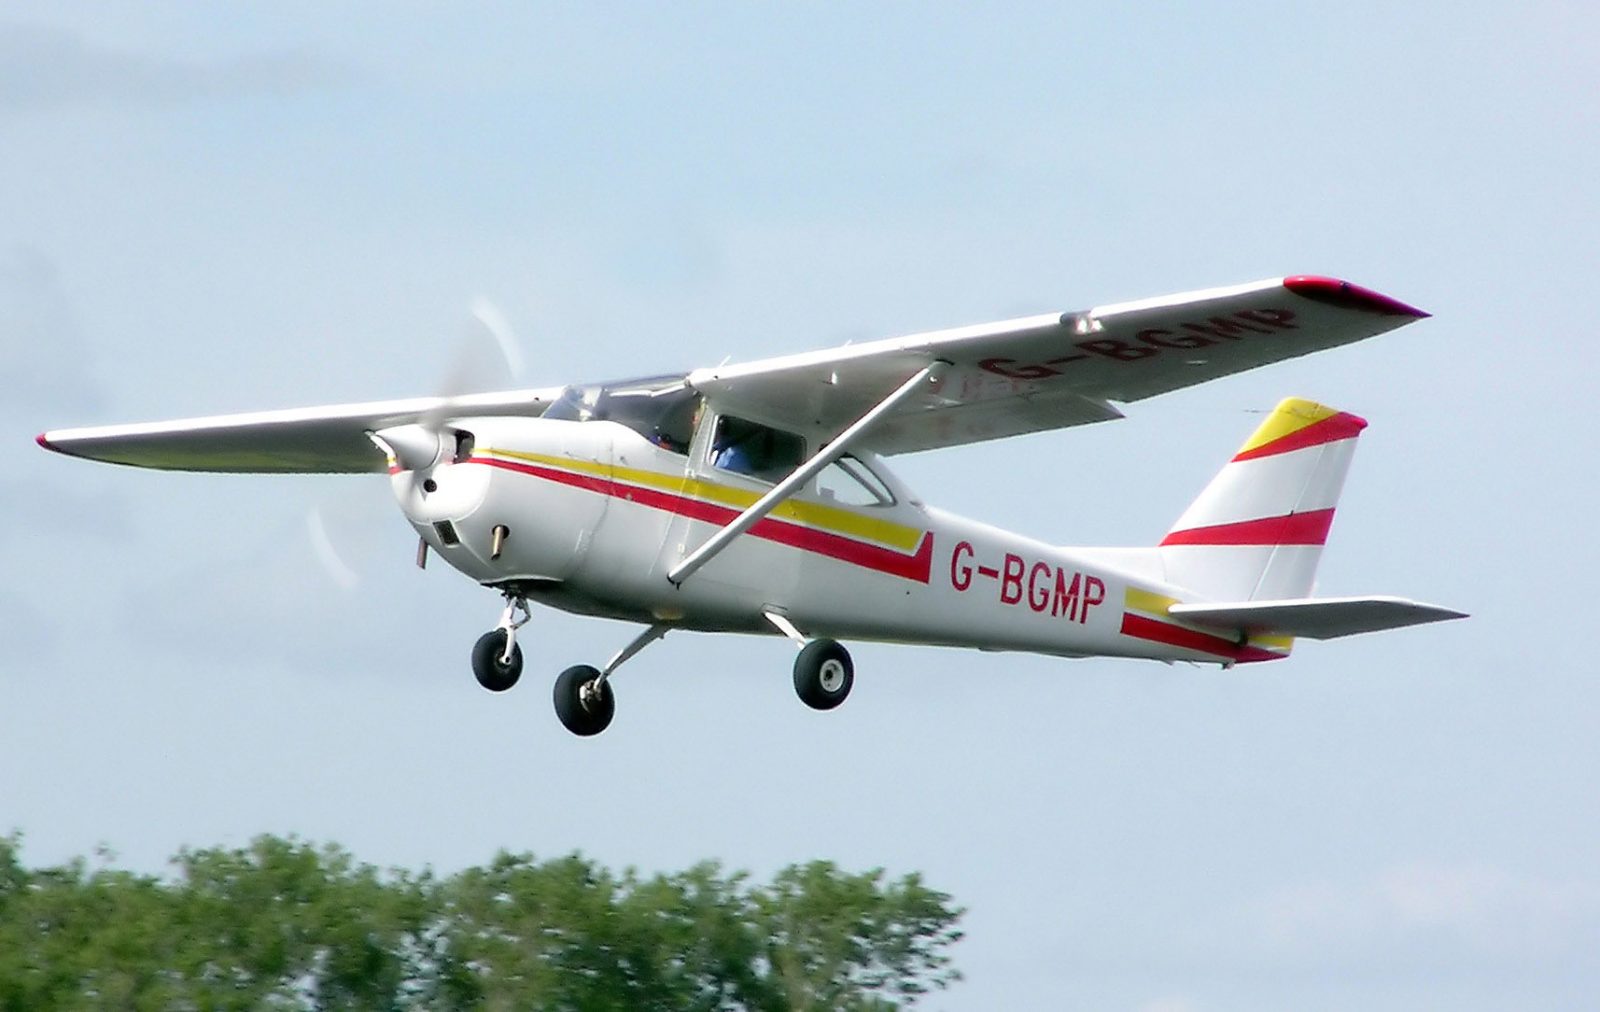 UPDATE: Searchers find wreckage of missing plane